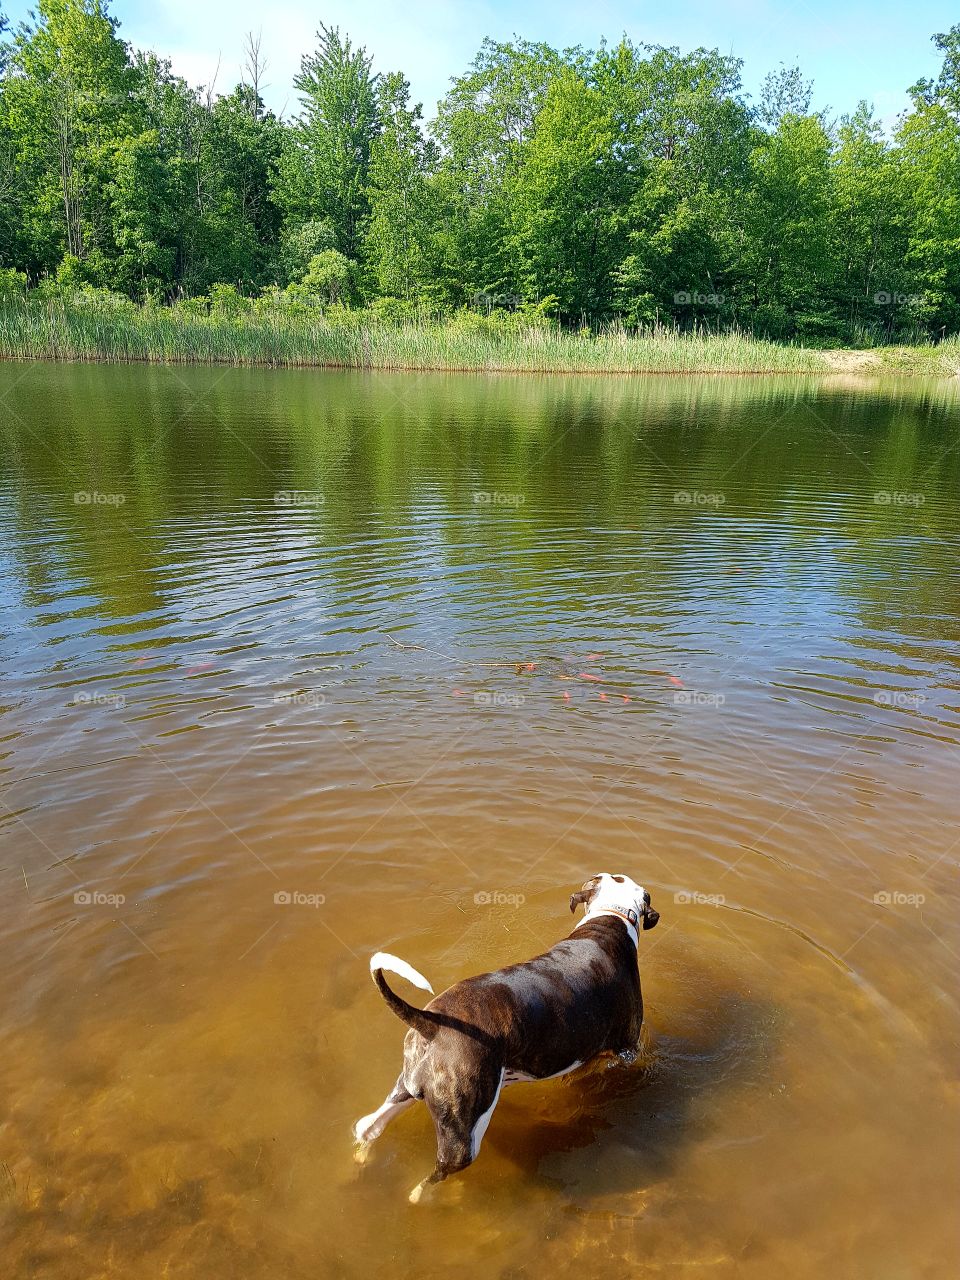 A dog wades through rippled pond water that fades from brown to green. The gradient in this photo is amazing.